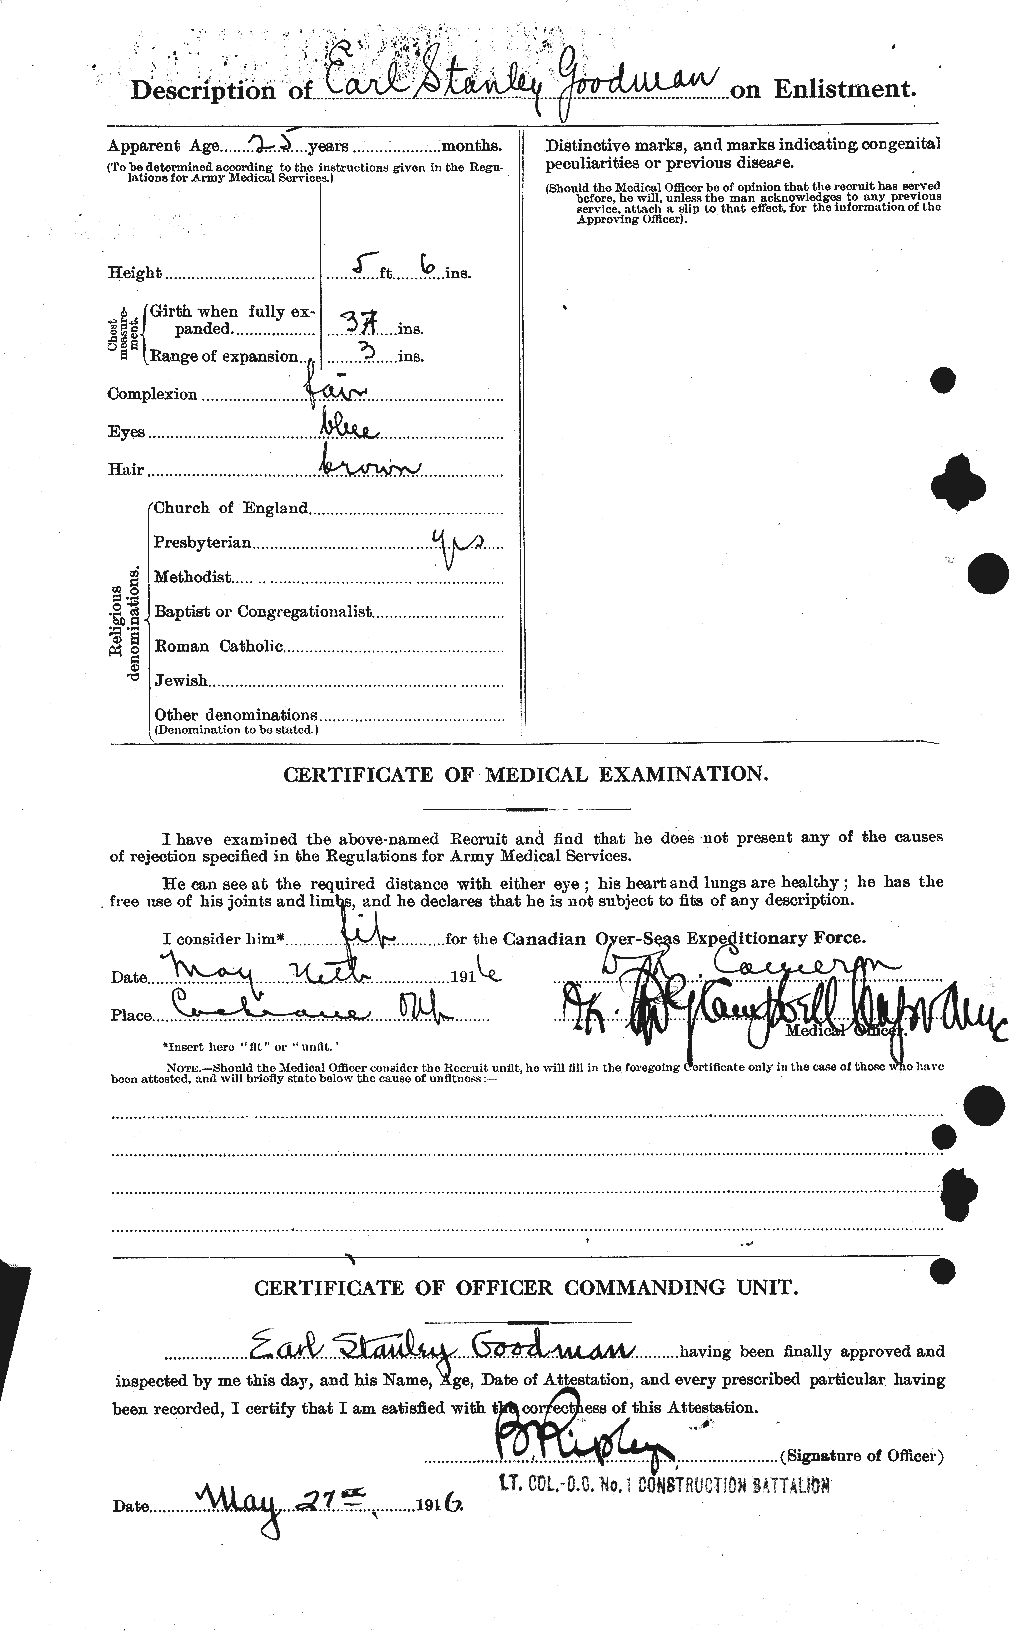 Personnel Records of the First World War - CEF 356126b